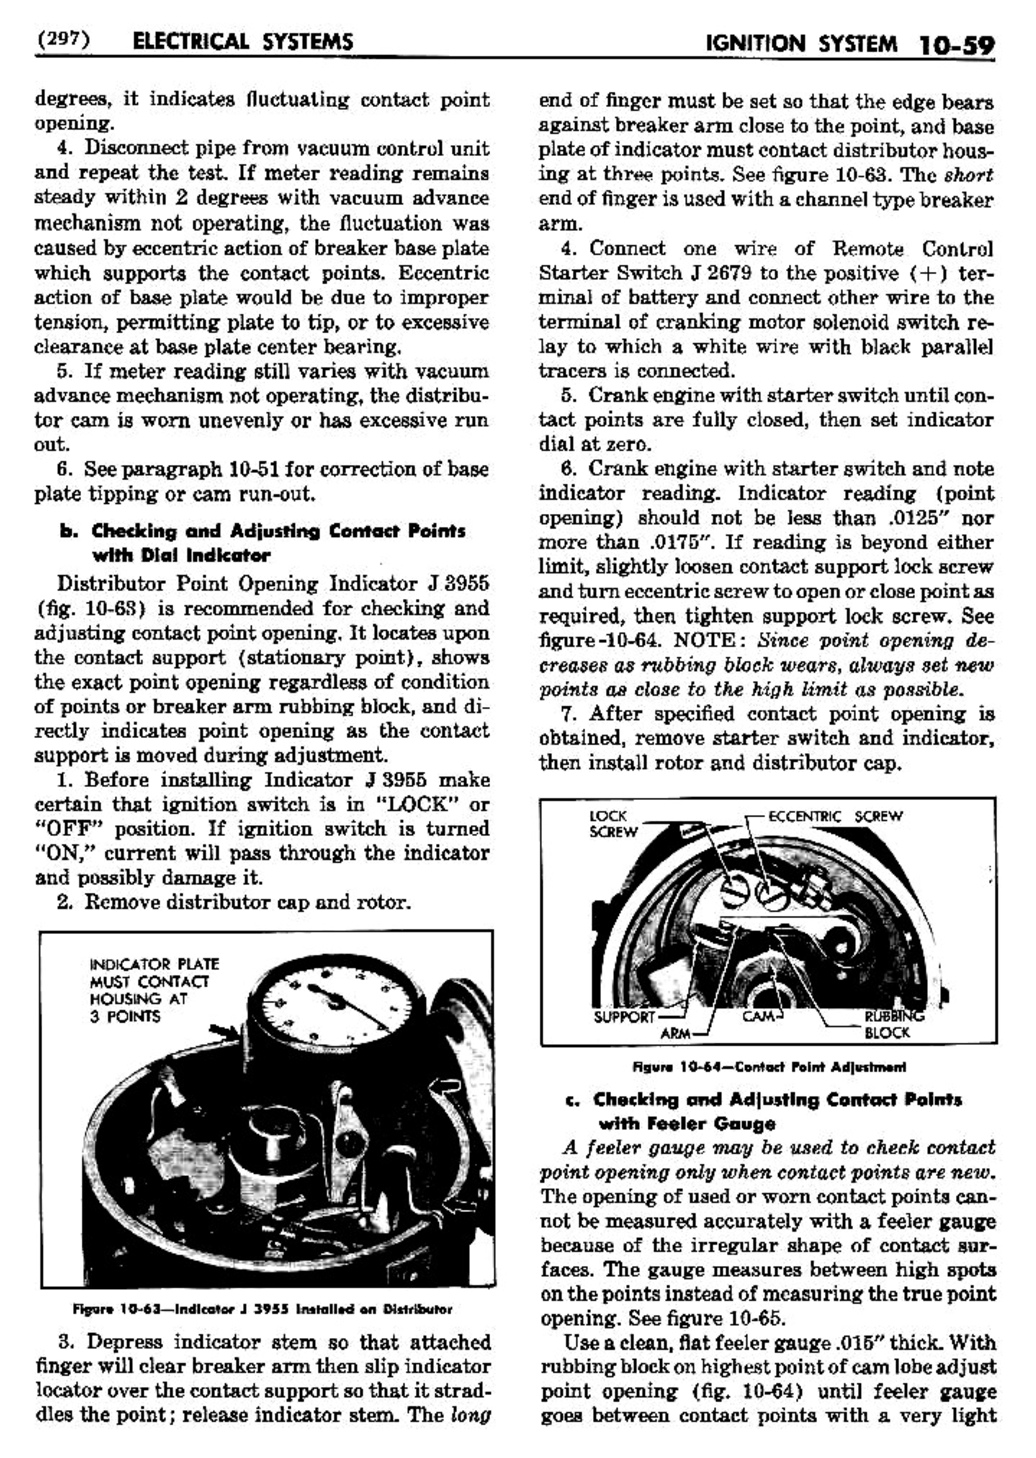 n_11 1950 Buick Shop Manual - Electrical Systems-059-059.jpg